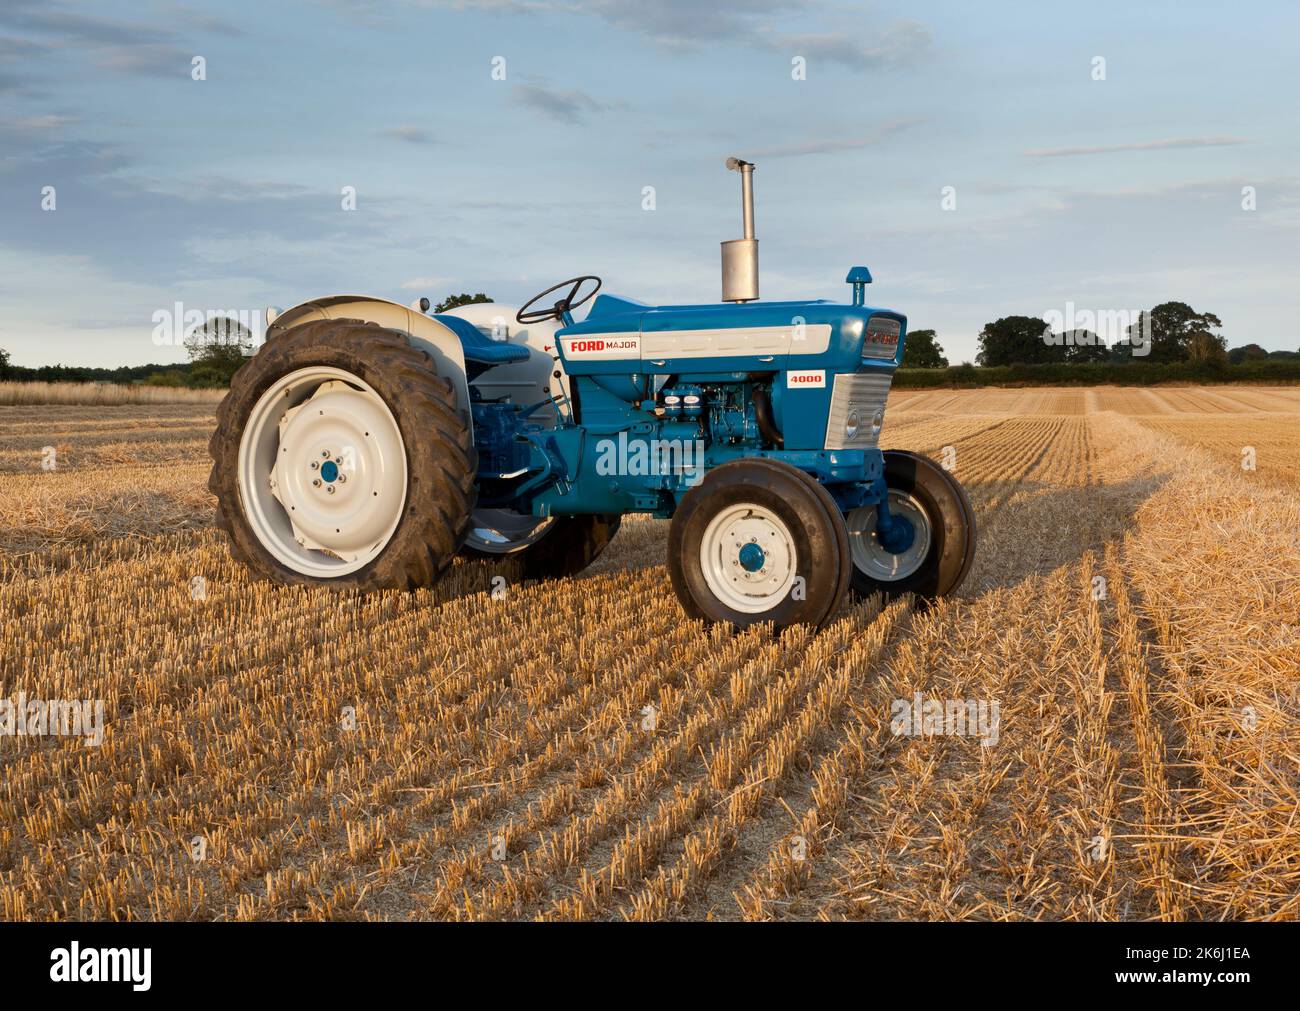 Ford 4000 Pre-Force 1966 vintage tractor Stock Photo